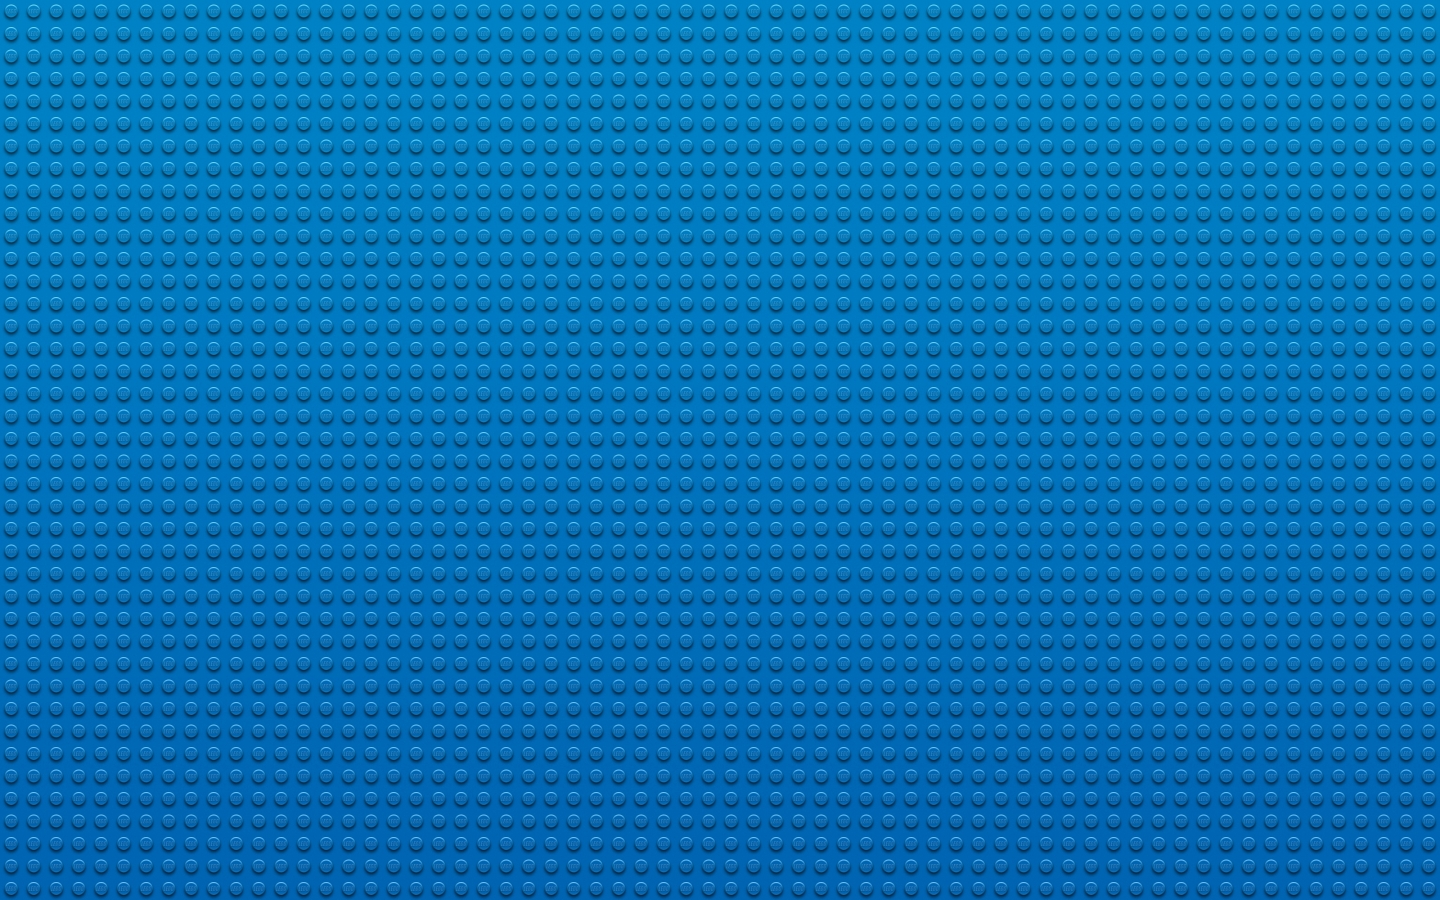 Lego Texture for 1440 x 900 widescreen resolution